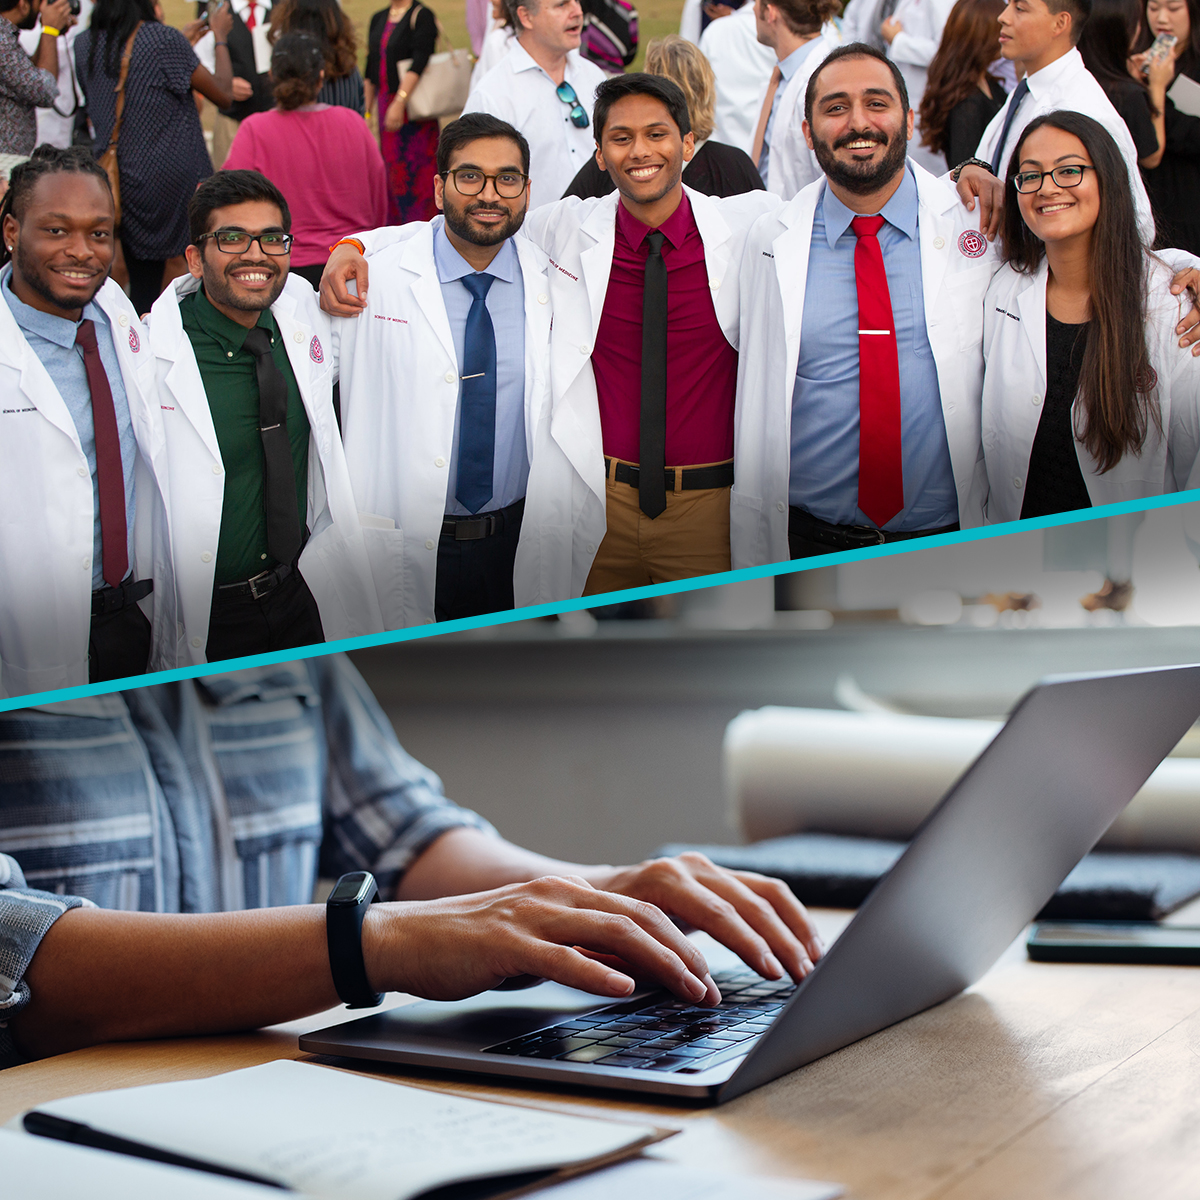 Split image with a smiling group of medical students on the left and a close-up of hands typing on a laptop on the right